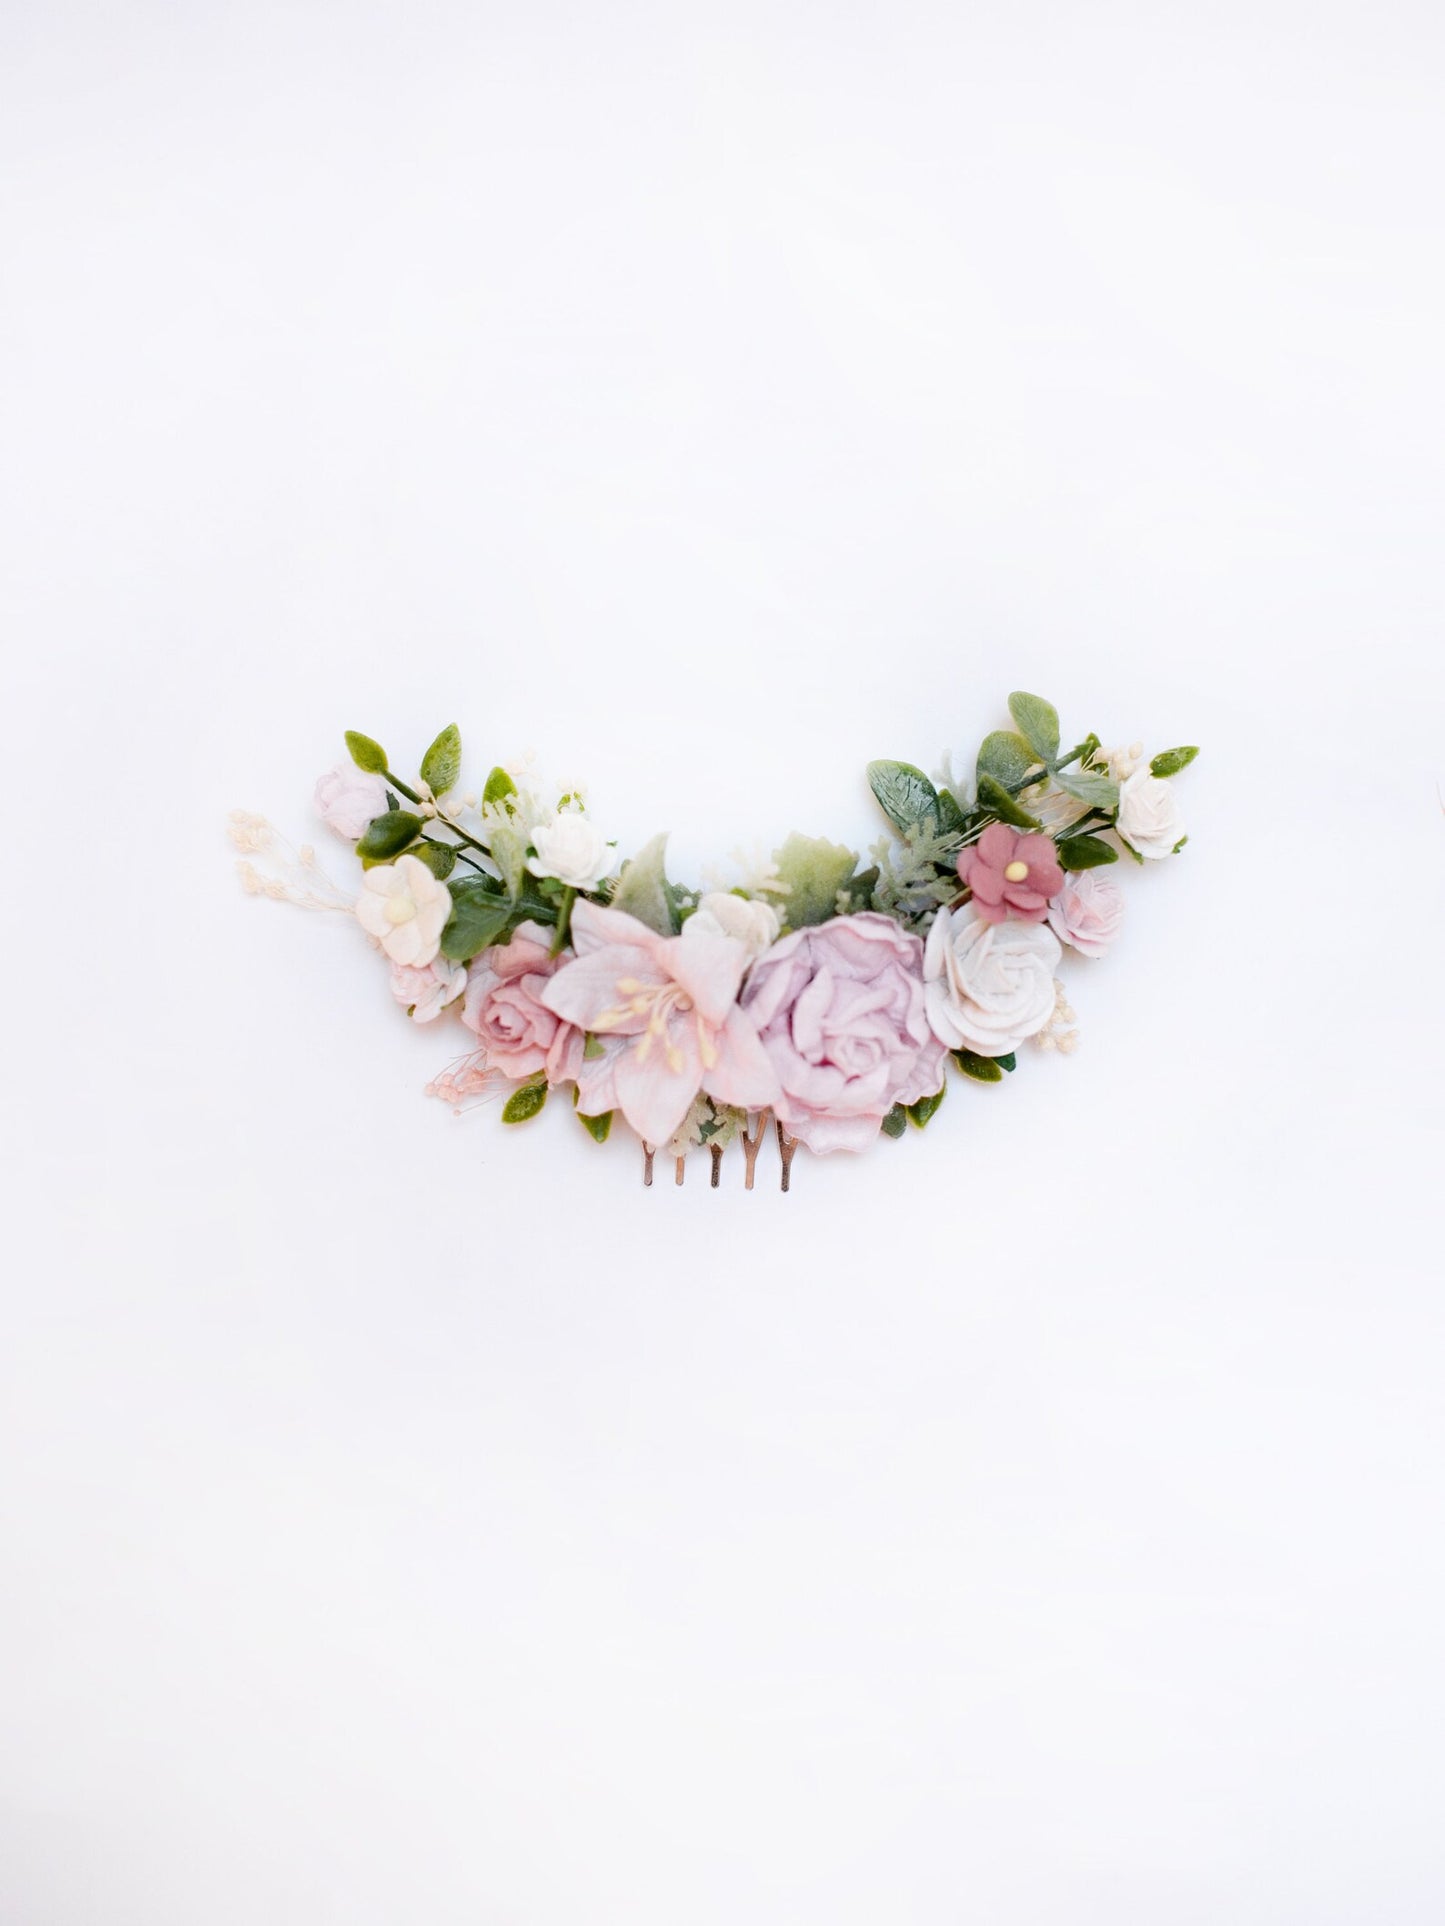 wedding flower comb, bridal flower comb, blush flower comb, boho flower comb, bridal flower comb, rustic wedding comb, bridesmaid comb, bride hair comb, holiday hair comb, burgundy floral comb, girl hair comb, nude flower comb, pastel flower comb, pink hair comb, greenery hair piece, mini hair comb, flower hair comb, orange flower comb, pink flower comb, gray flower comb, light pink comb, ivory hair piece, vintage bridal comb, outdoor wedding, floral comb bride